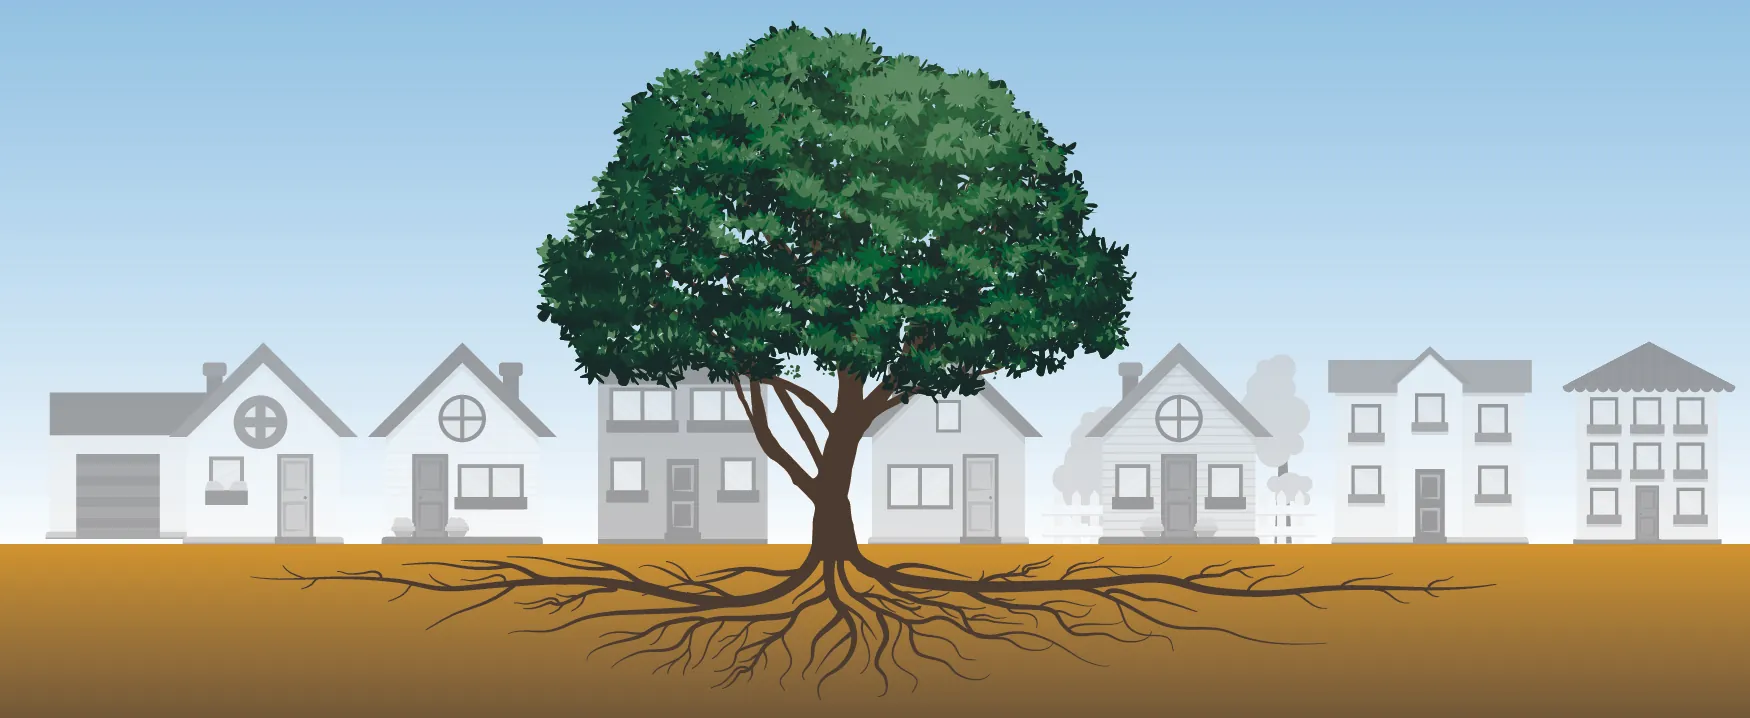 A tree grows centered in front of a row of houses. The tree’s roots spread out underground, extending the width of the row of houses in both directions.